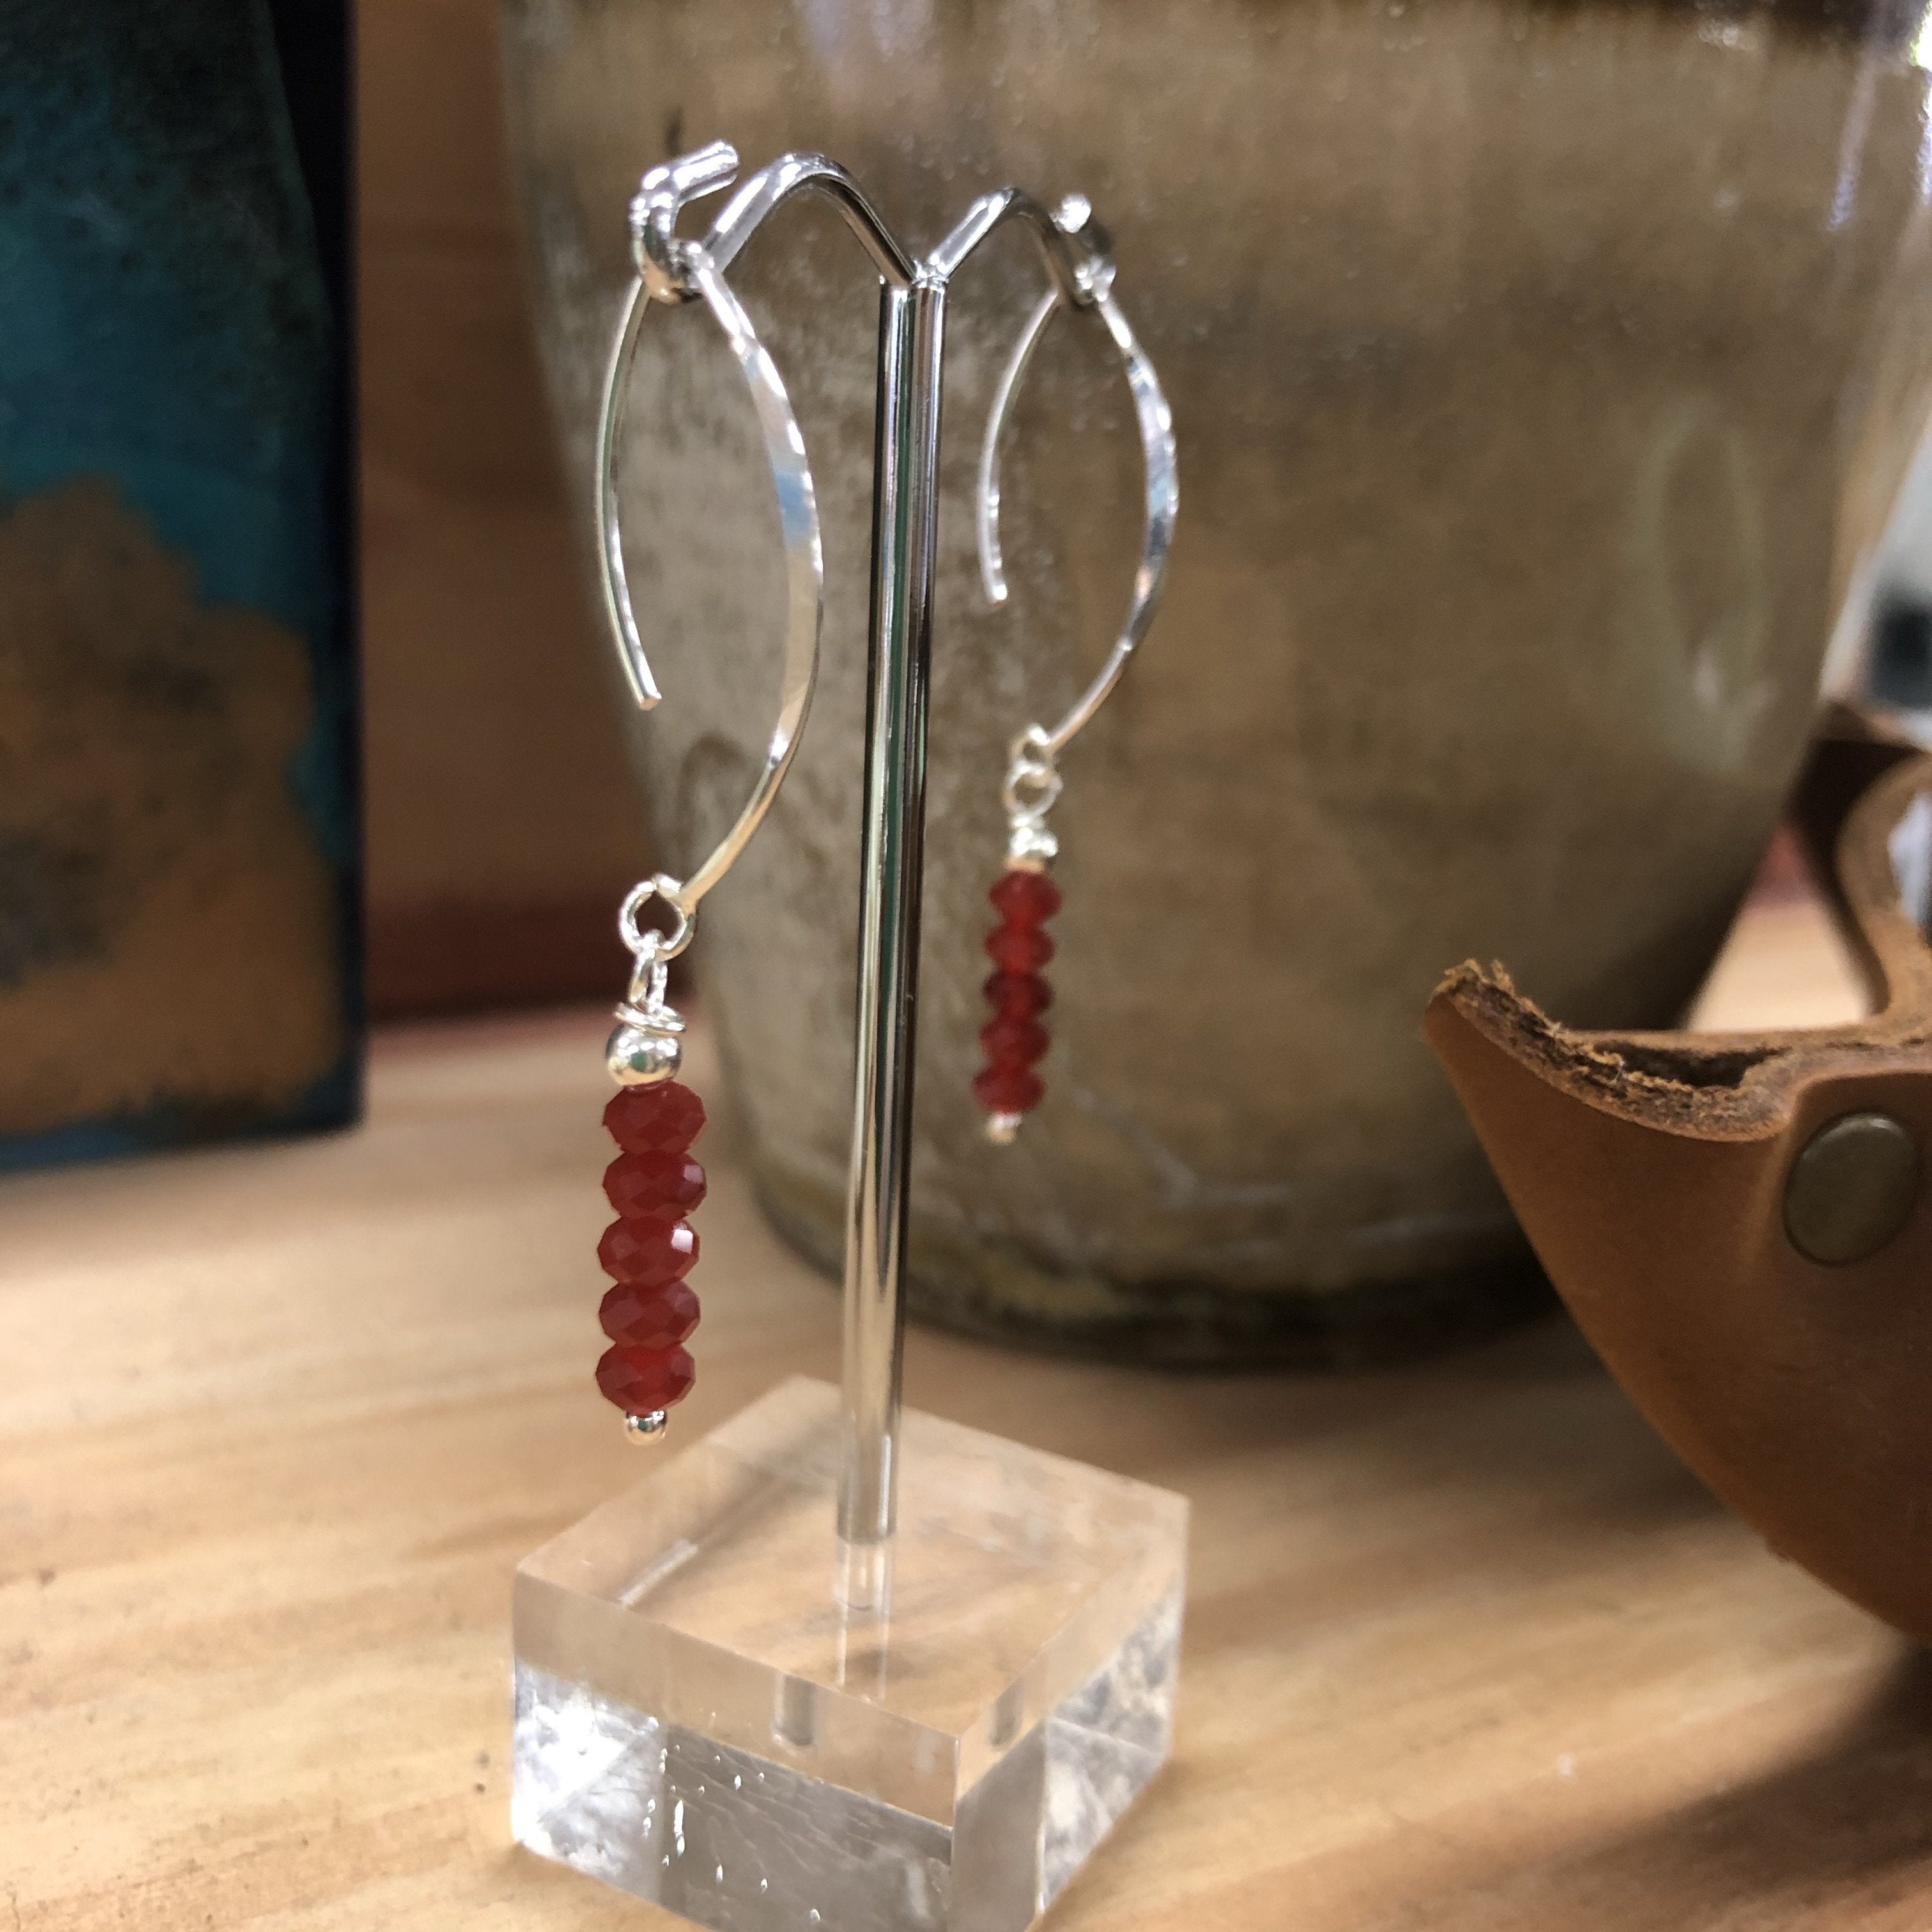 Pearl or Gem Stack Earring Ai276